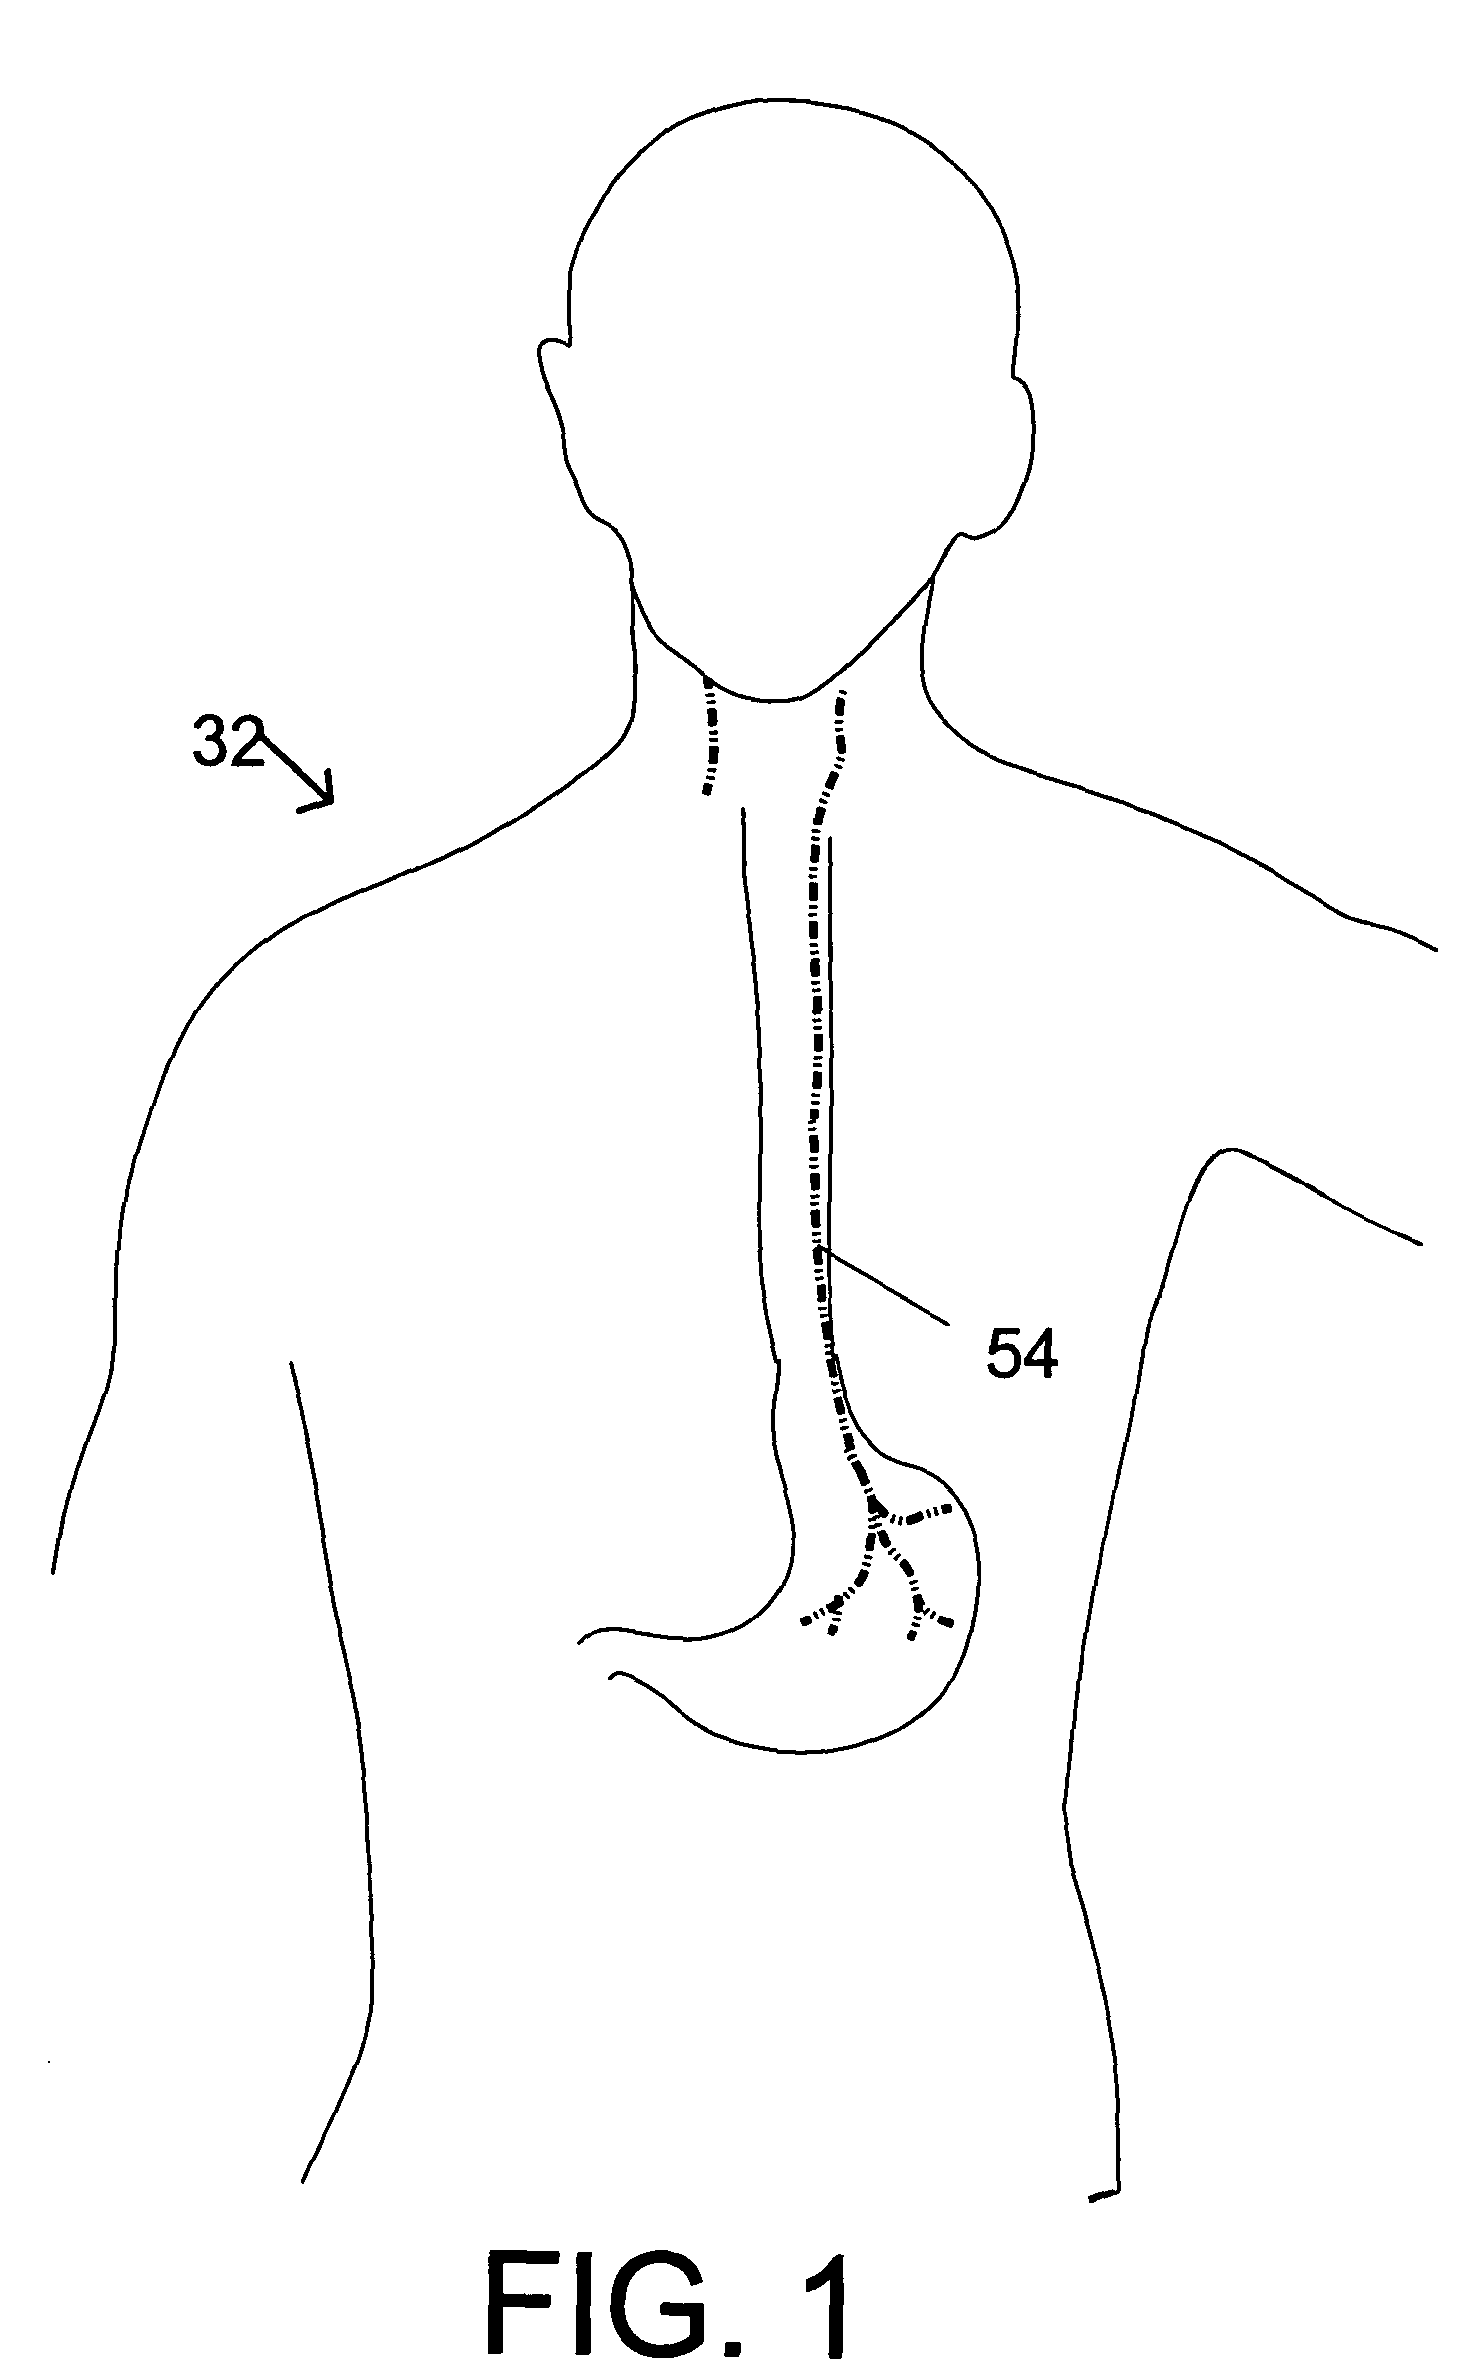 System and method for providing electrical pulses to the vagus nerve(s) to provide therapy for obesity, eating disorders, neurological and neuropsychiatric disorders with a stimulator, comprising bi-directional communication and network capabilities